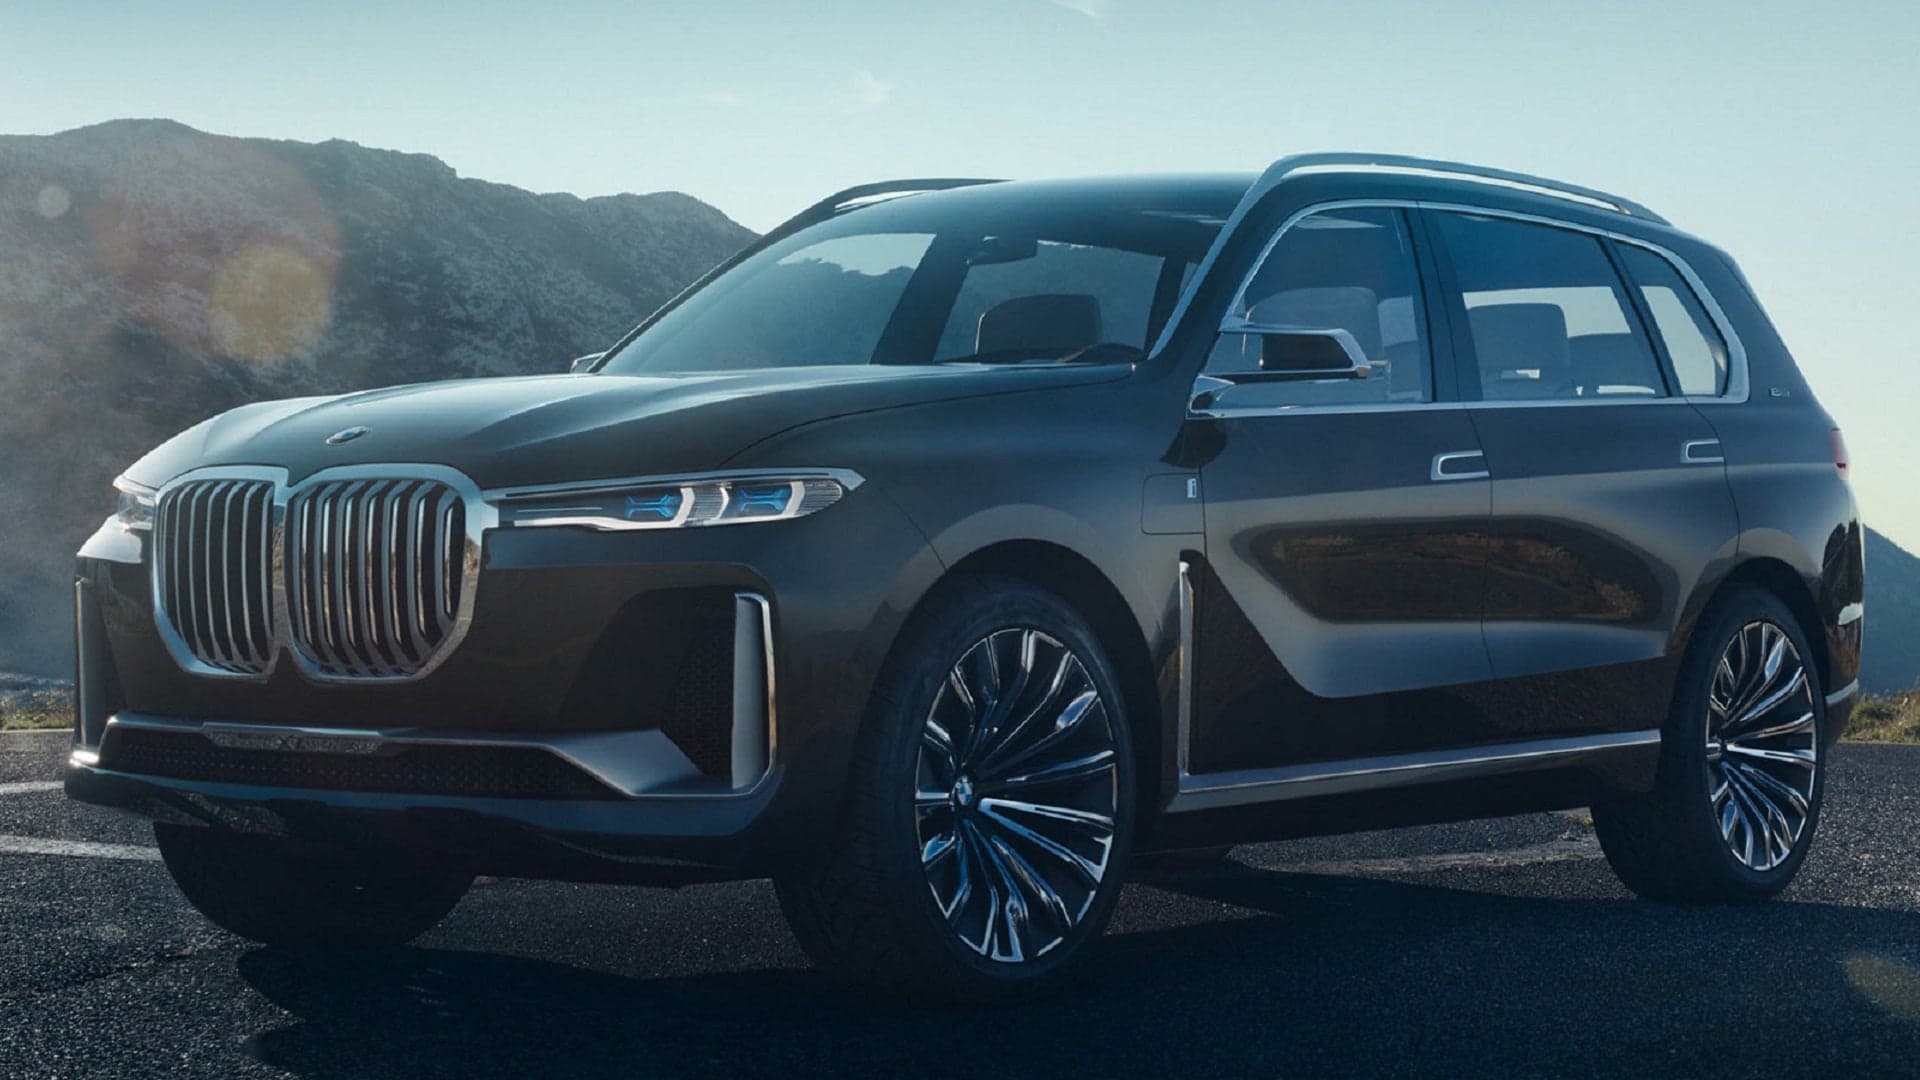 BMW X7 Concept Images Leak Before Reveal